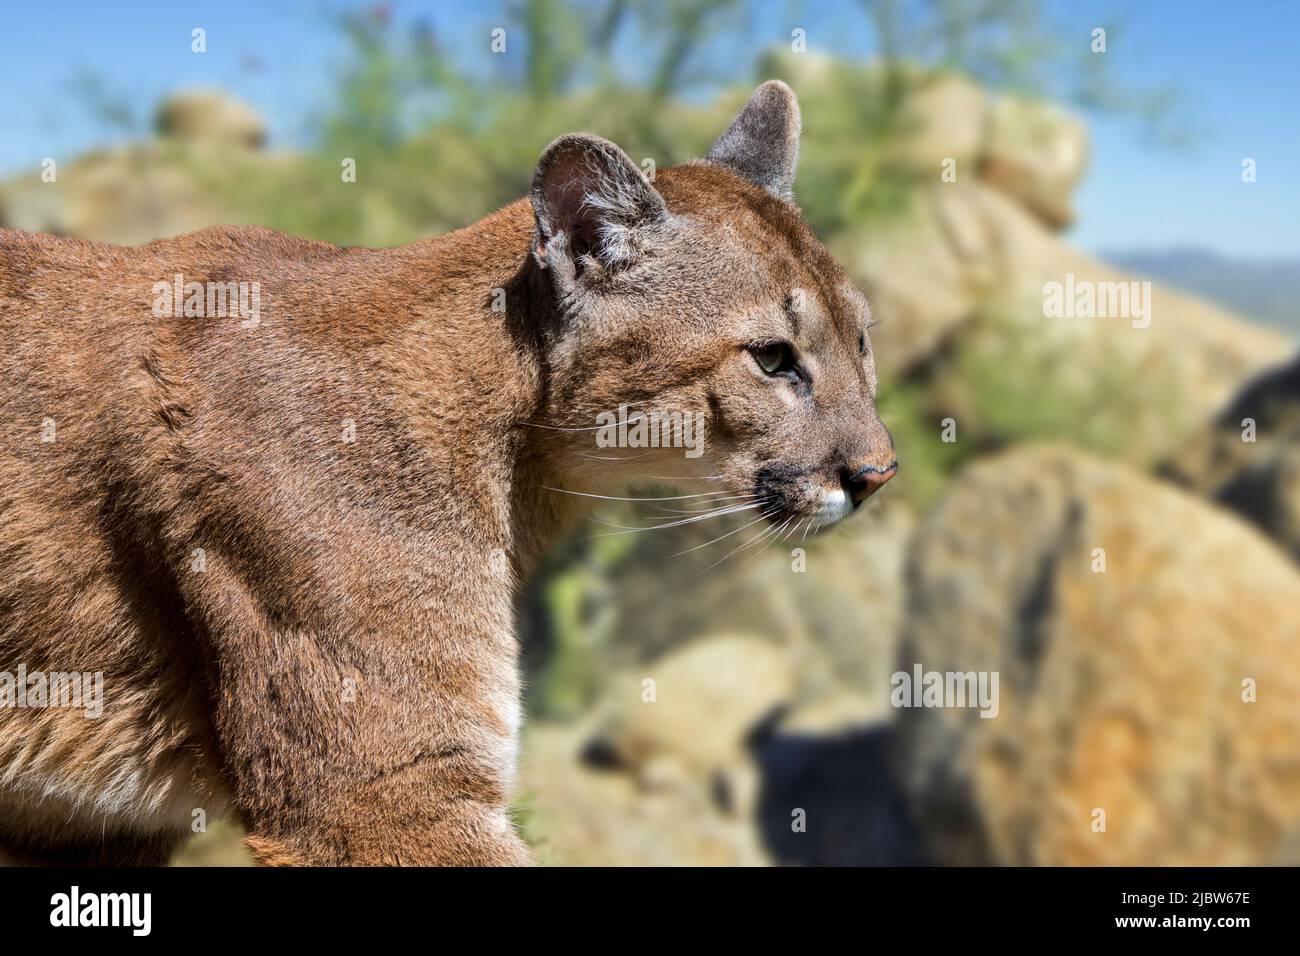 Close up portrait of cougar / puma / mountain lion / panther (Puma concolor) hunting in the North American Sonoran desert, Arizona, USA Stock Photo